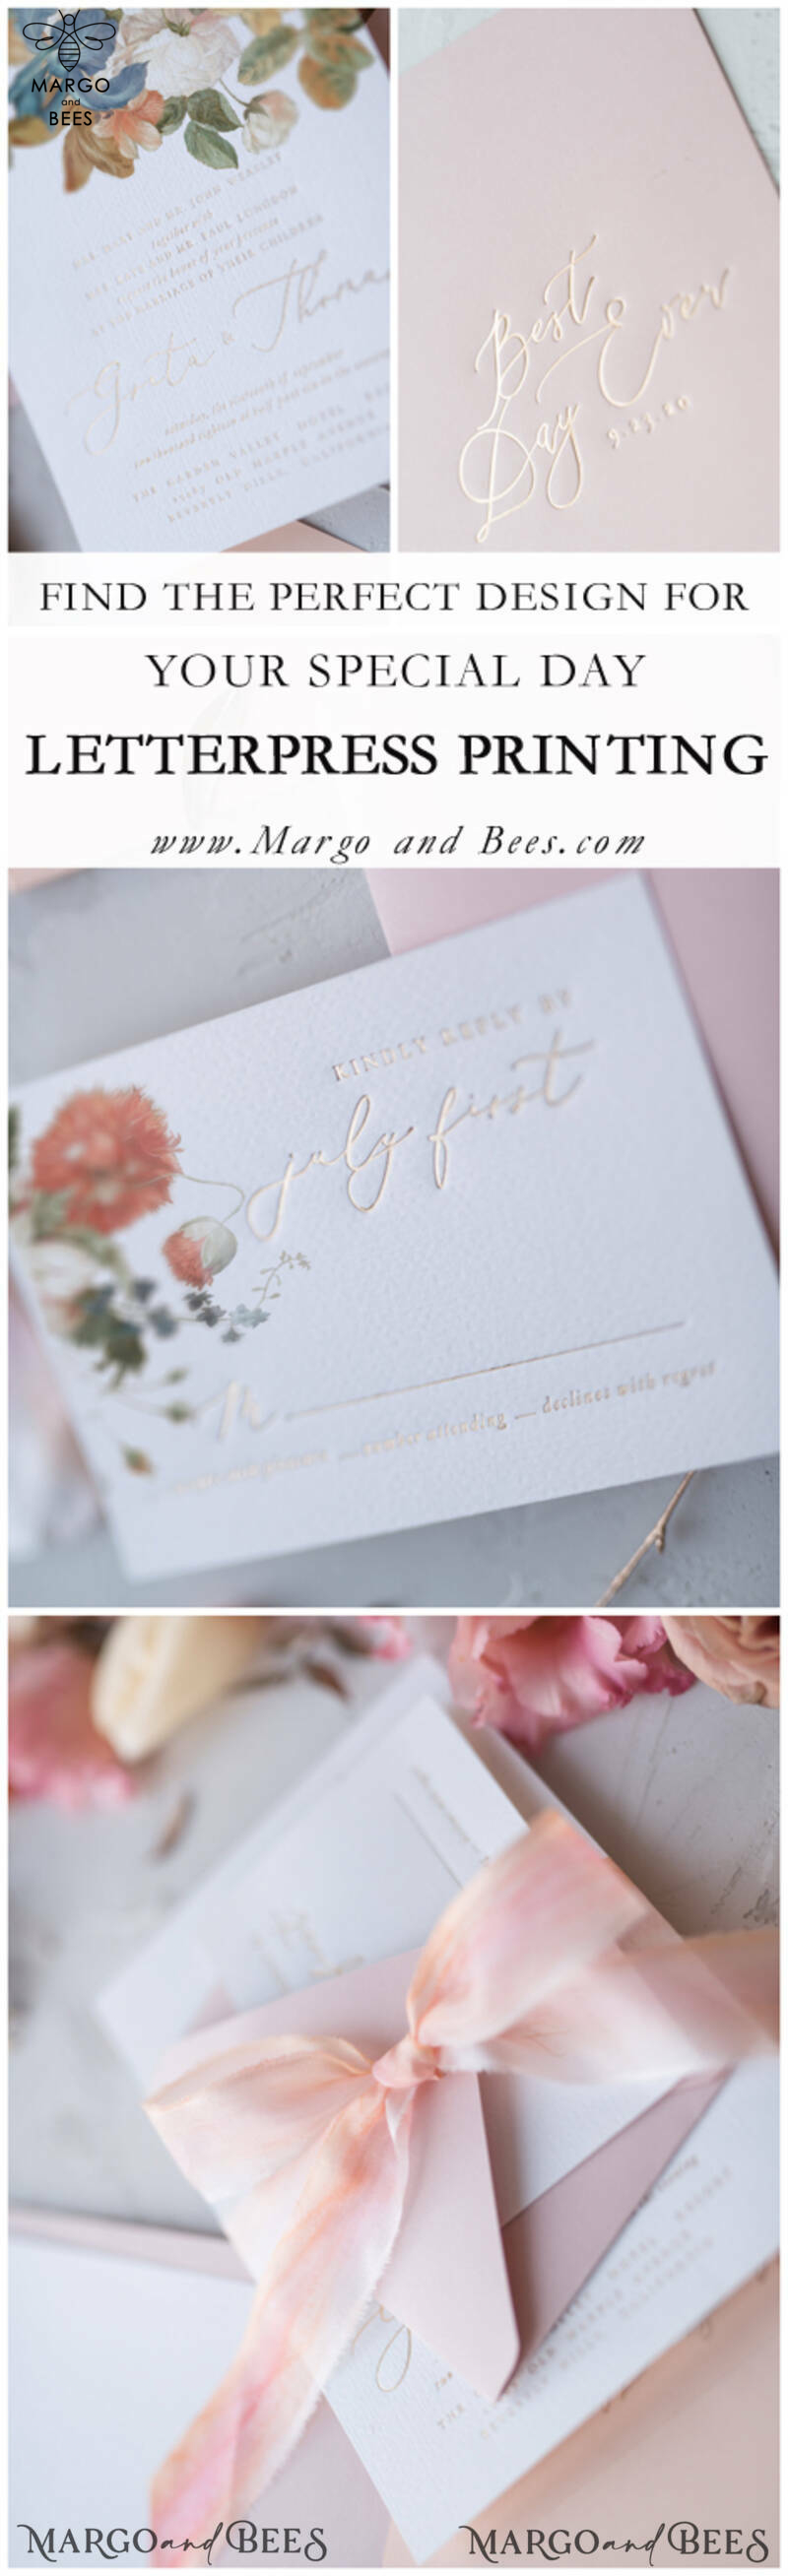 Vintage Romantic Wedding Invitations Blossom Stationery with Gold Foil Lettering Wax Seal Blush Pink or Peach Envelope-22